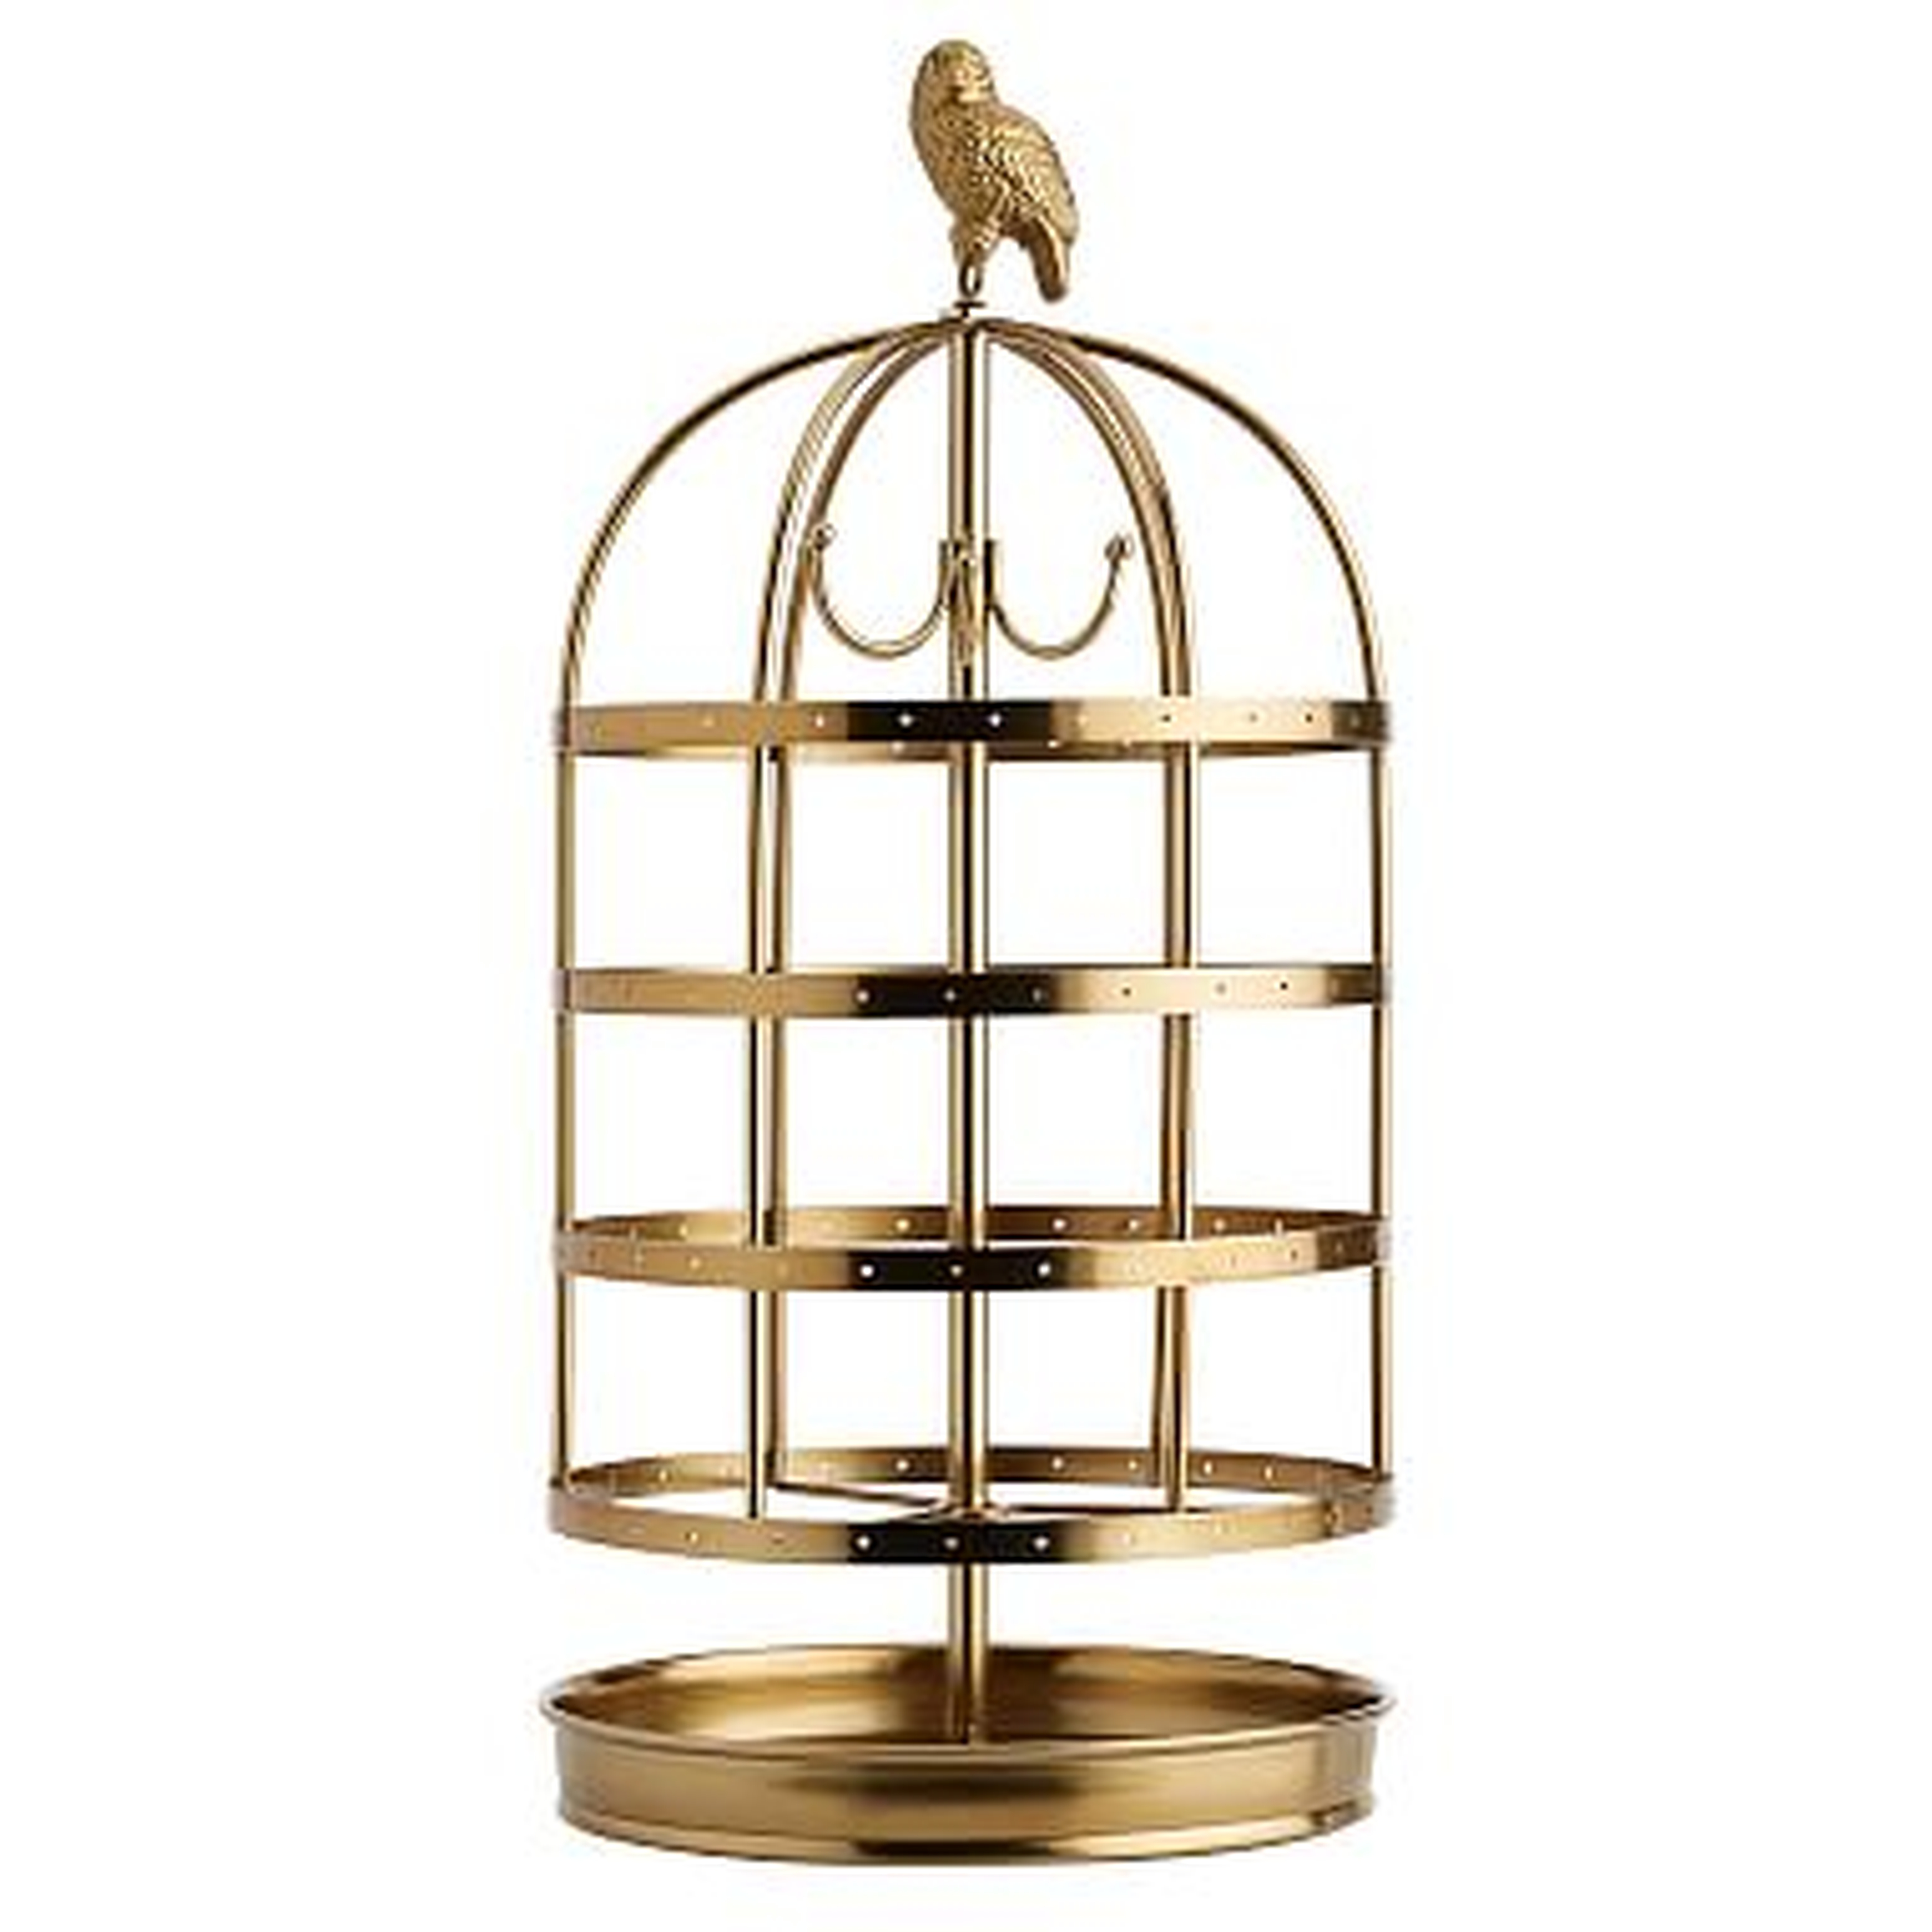 Harry Potter(TM) Hedwig Jewelry Cage - Pottery Barn Teen